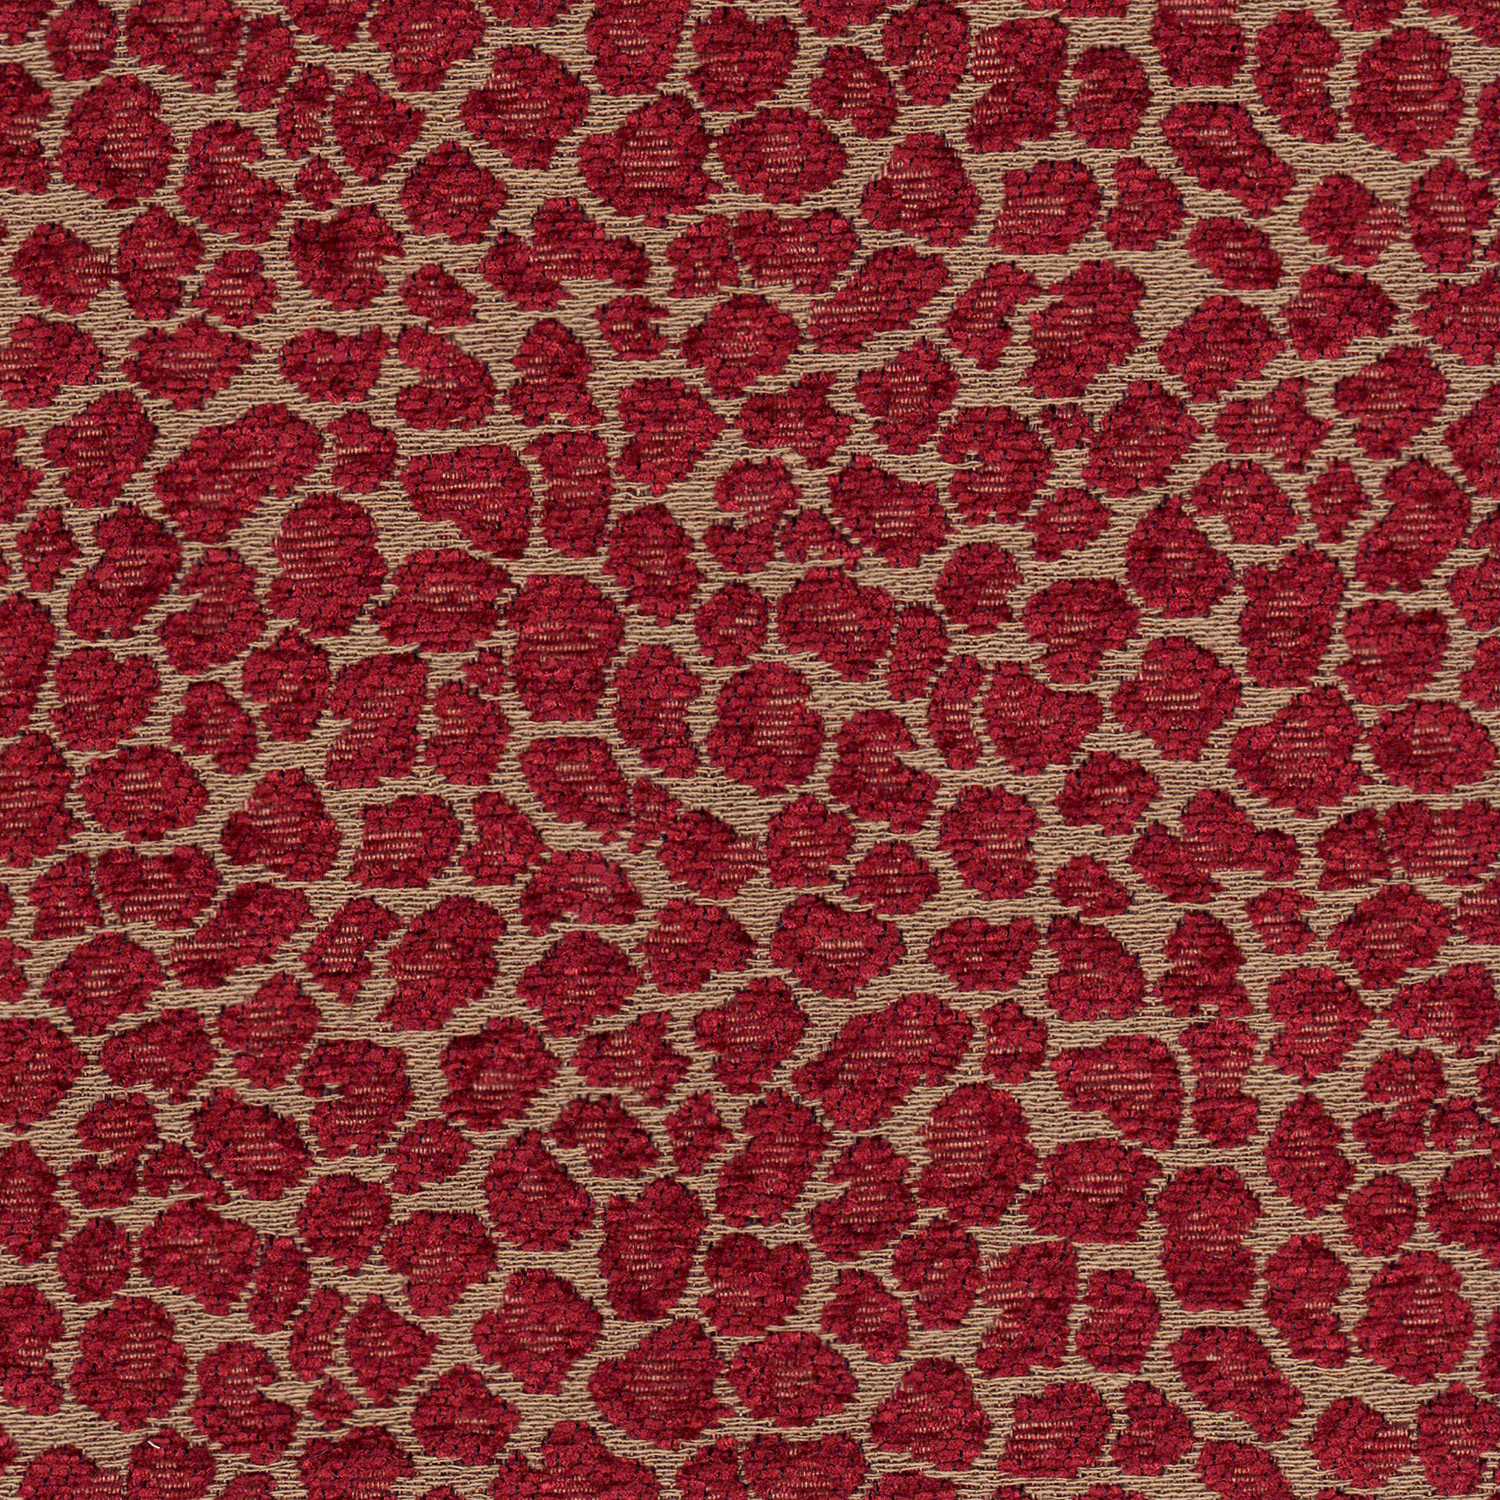 G-LEO/RED - Multi Purpose Fabric Suitable For Drapery